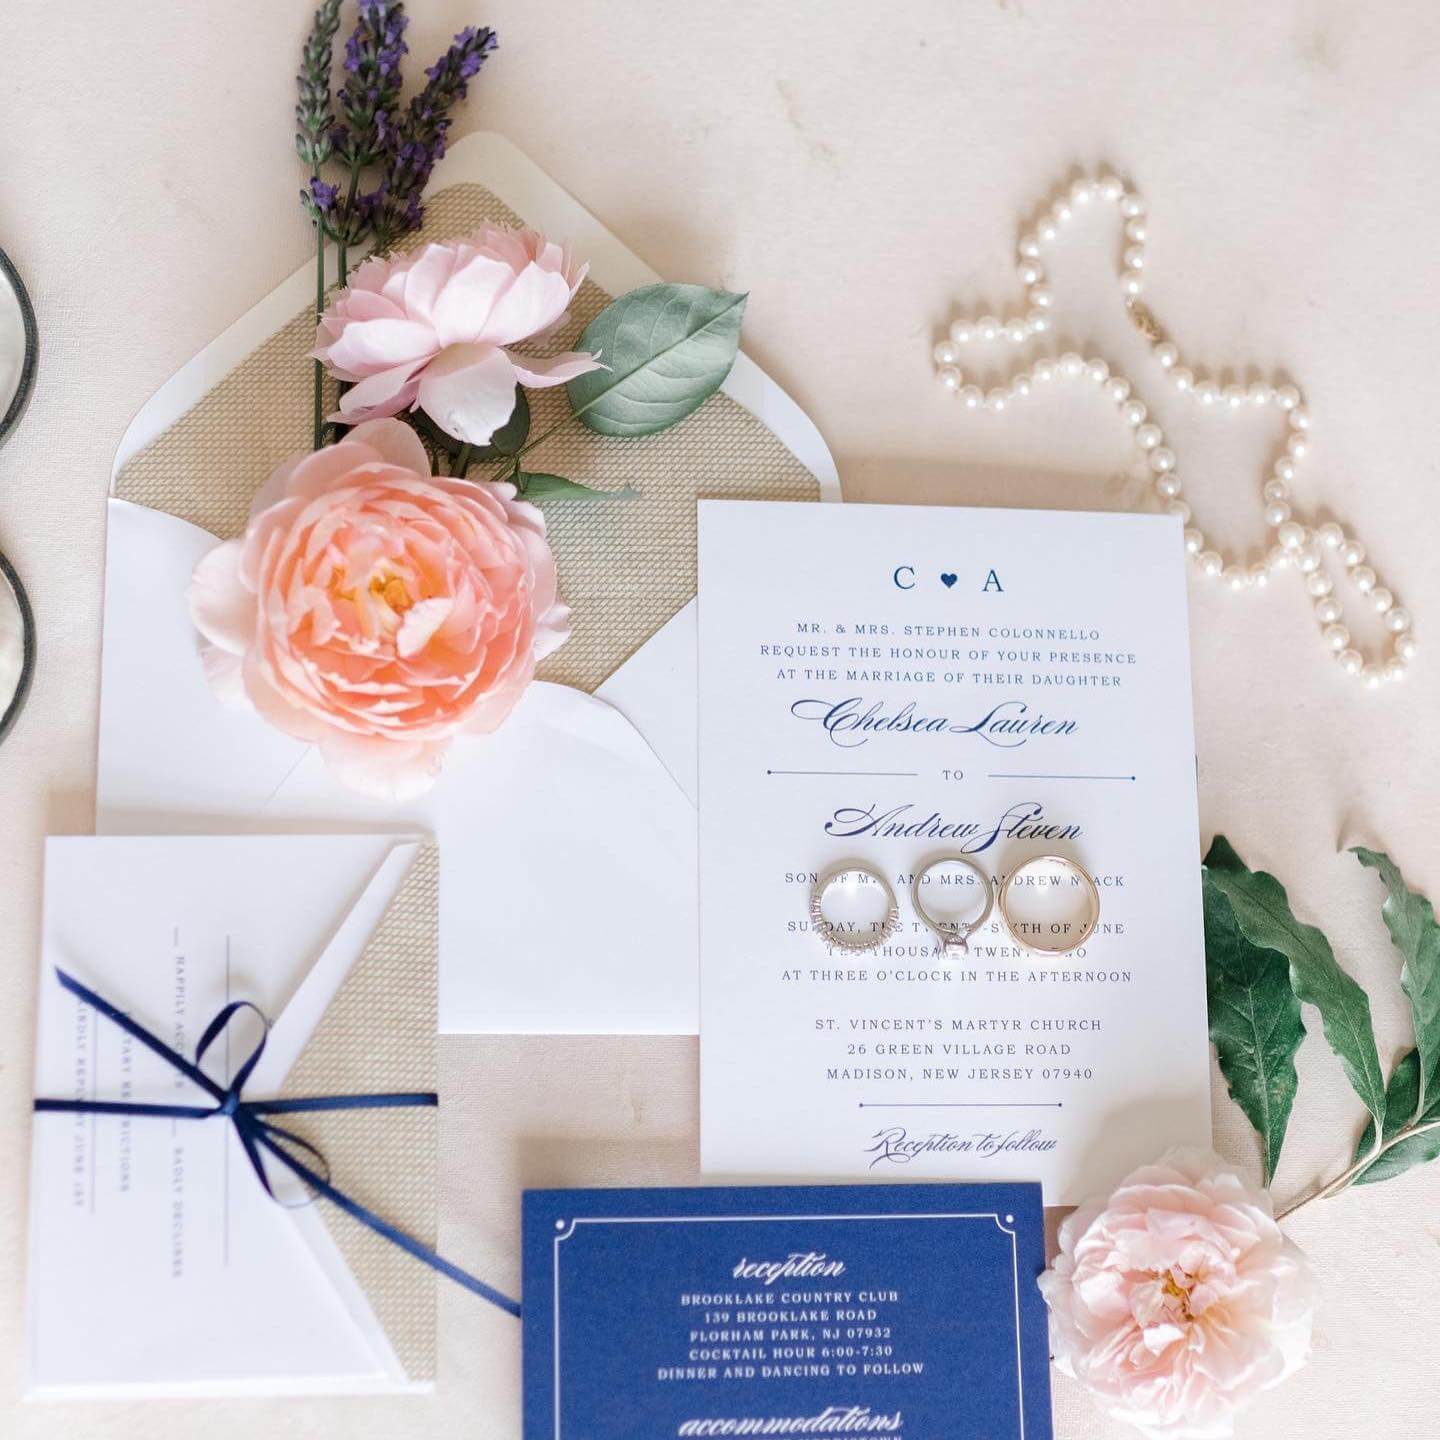     Navy wedding invitations adorned with elegant flowers and delicate pearls, perfect for couples celebrating their special day in charming New Jersey venues. These exquisite invitations capture the essence of a romantic Florham Park wedding, offering